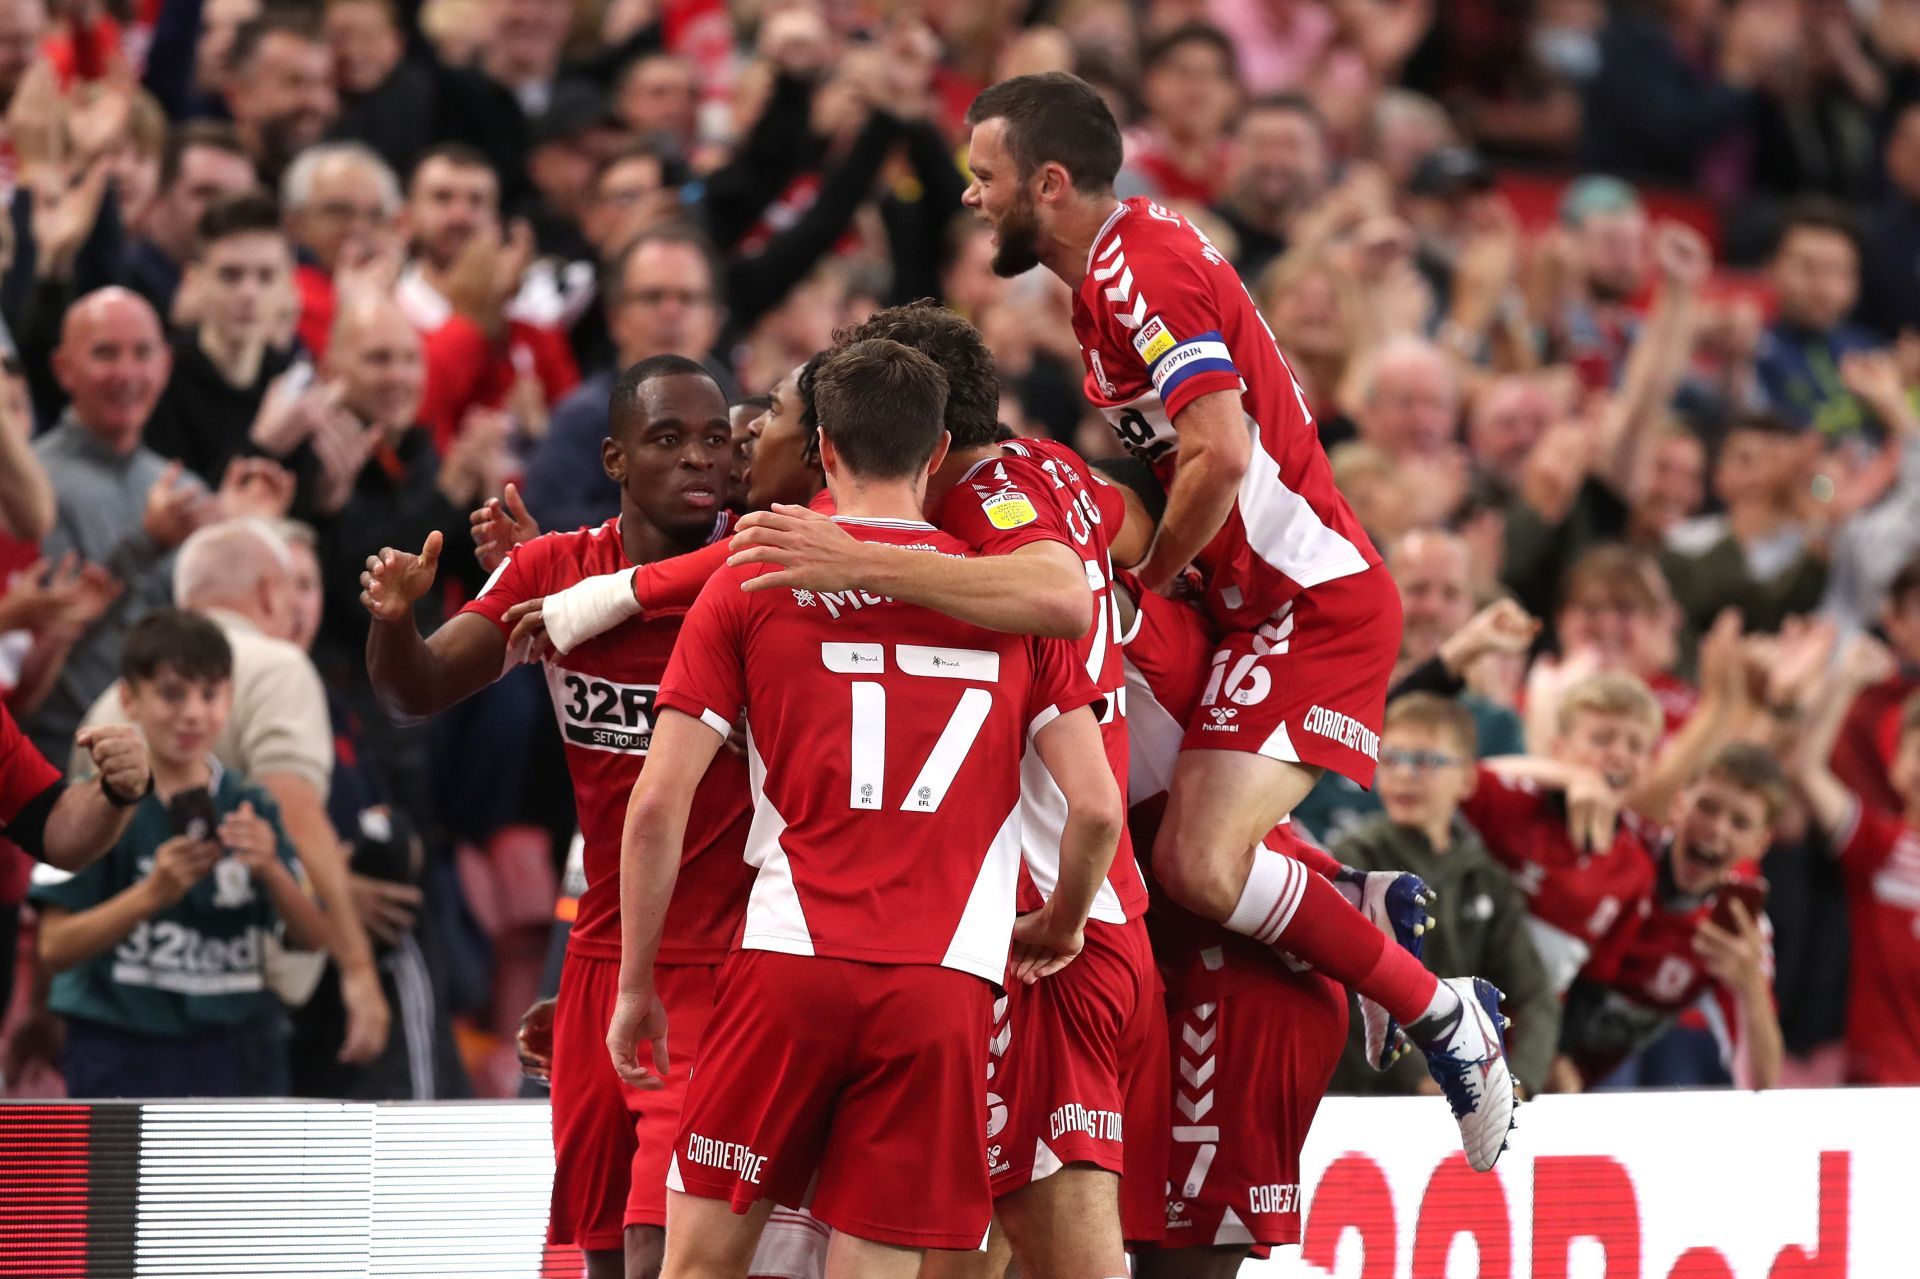 Middlesbrough will square off with Huddersfield Town on Saturday